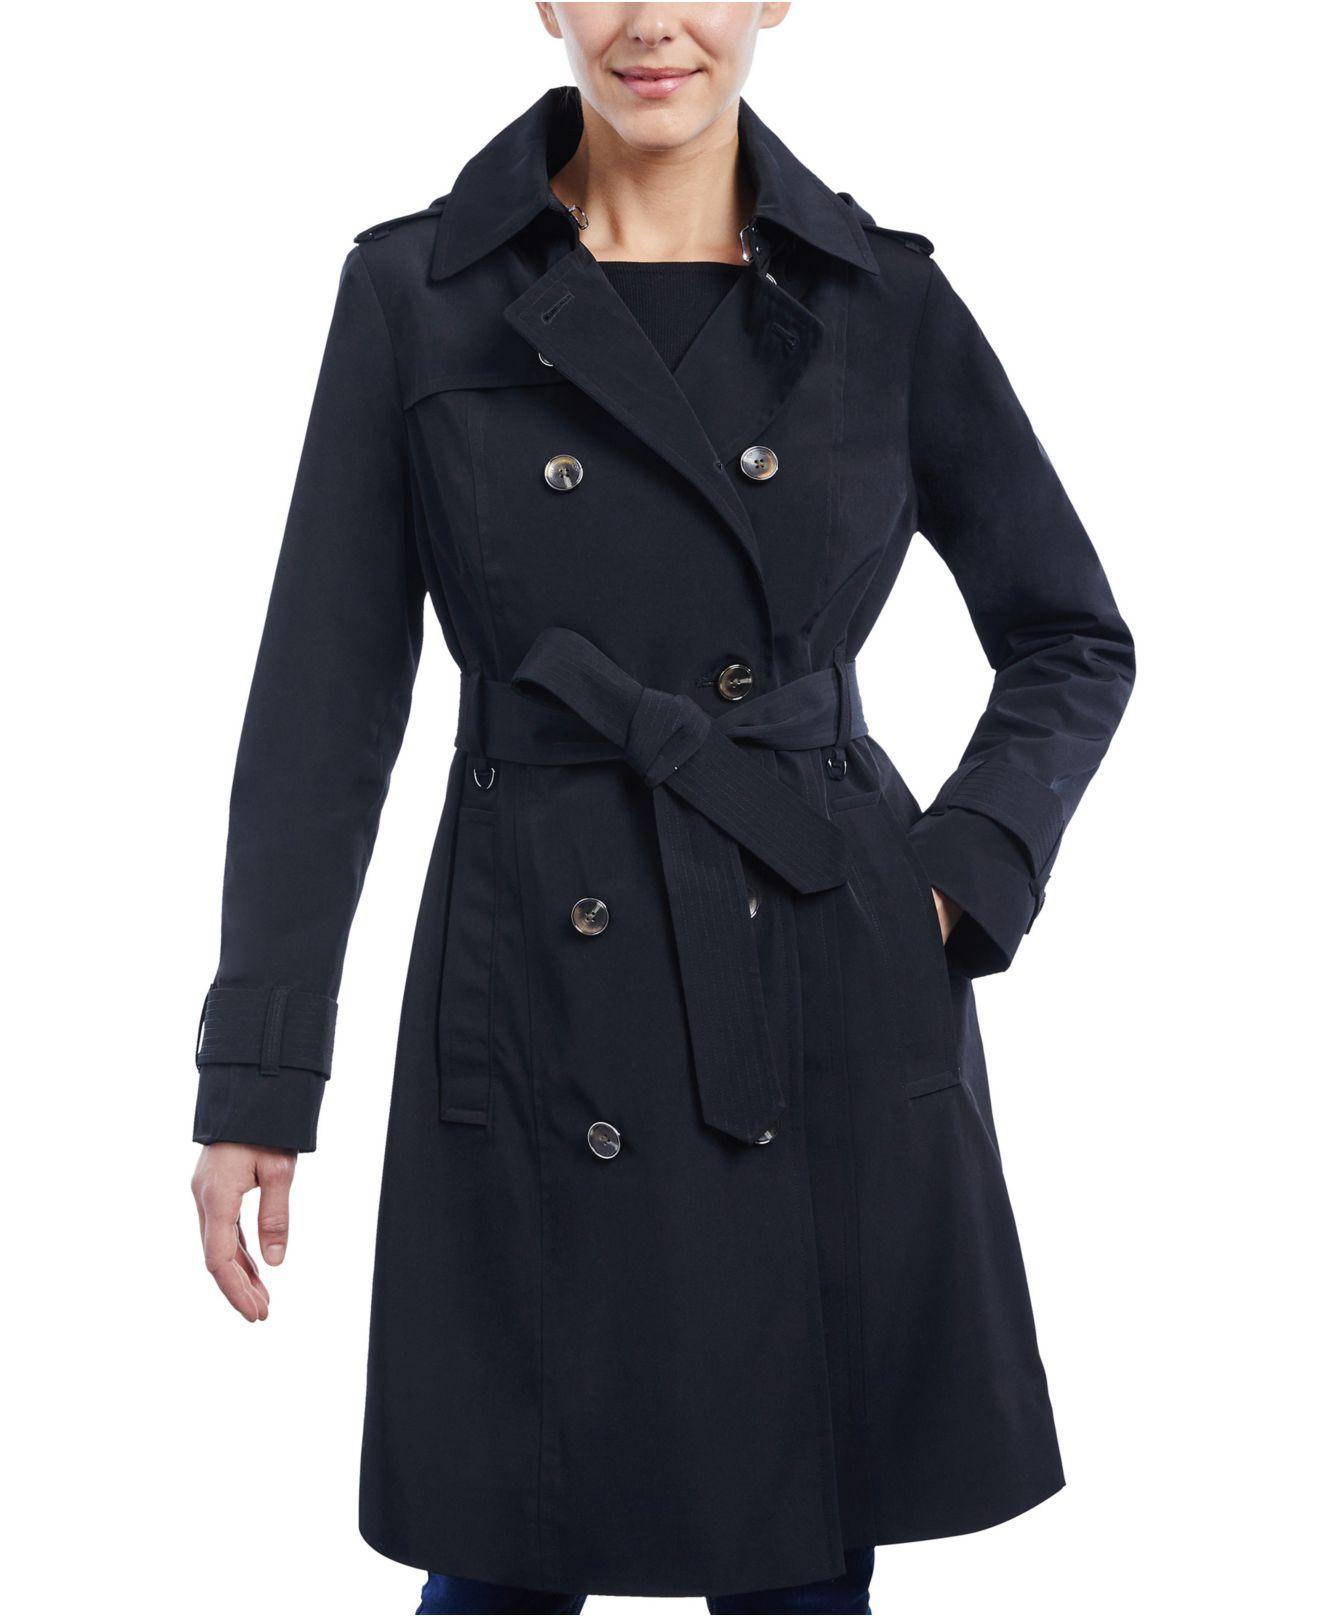 London Fog Petite Hooded Double-breasted Trench Coat in Black | Lyst